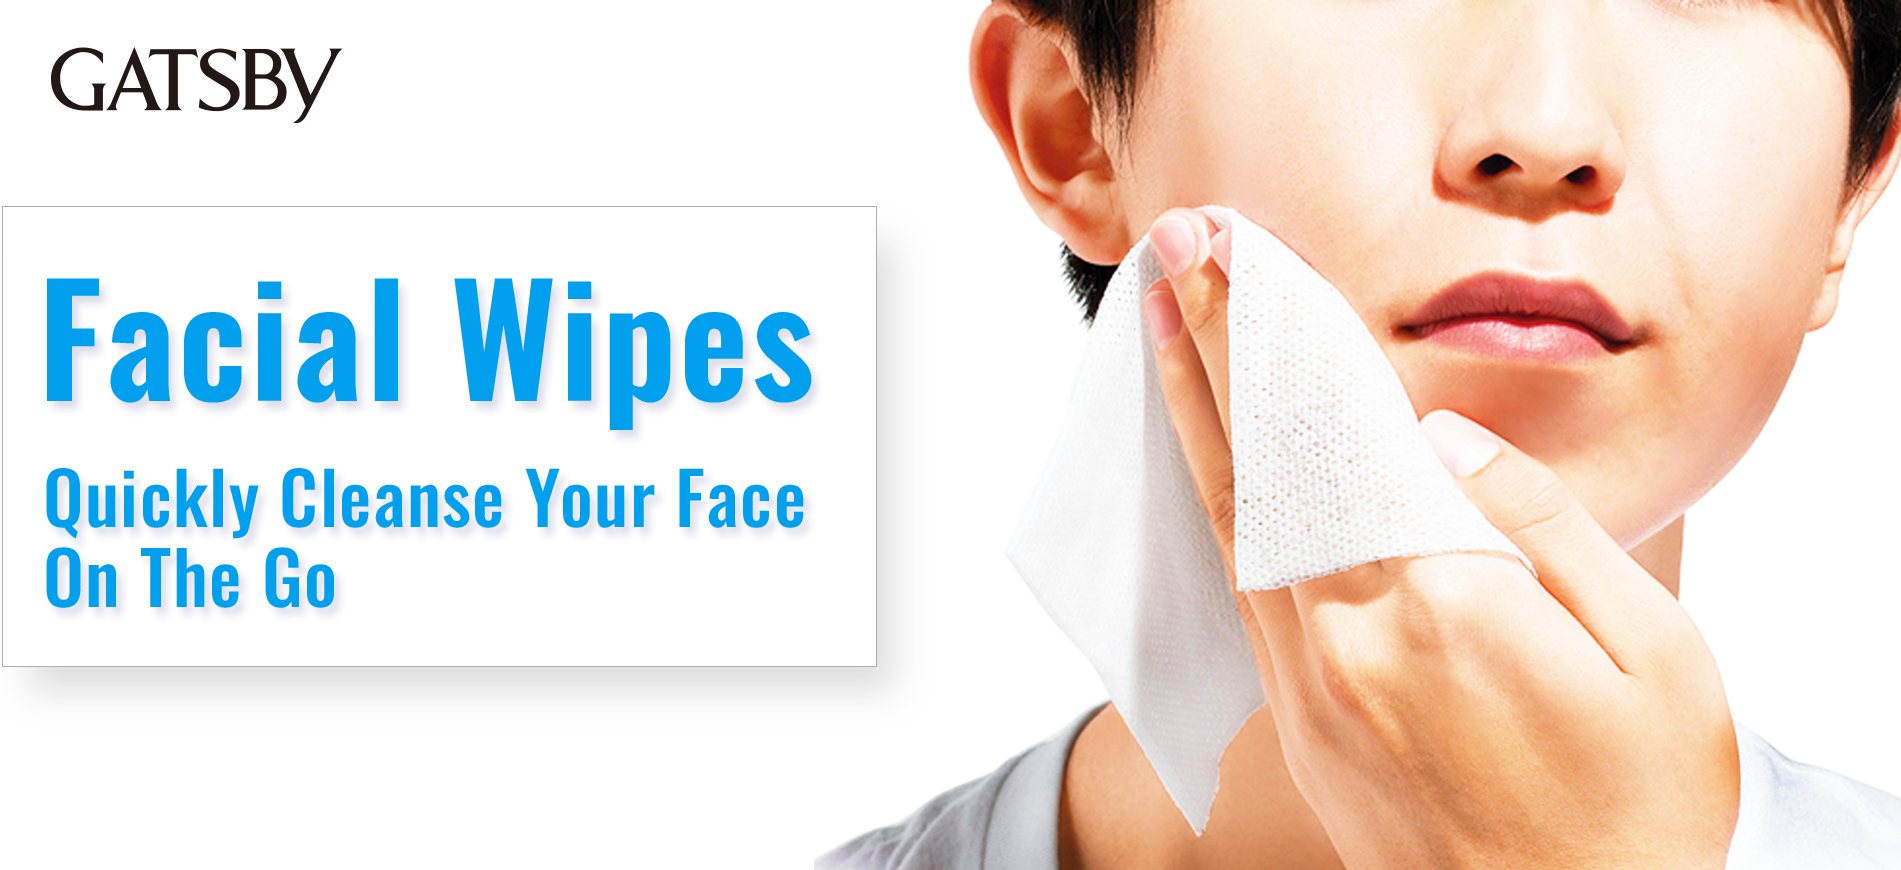 facial_wipes_quickly_cleanse_your_face_on_the_go